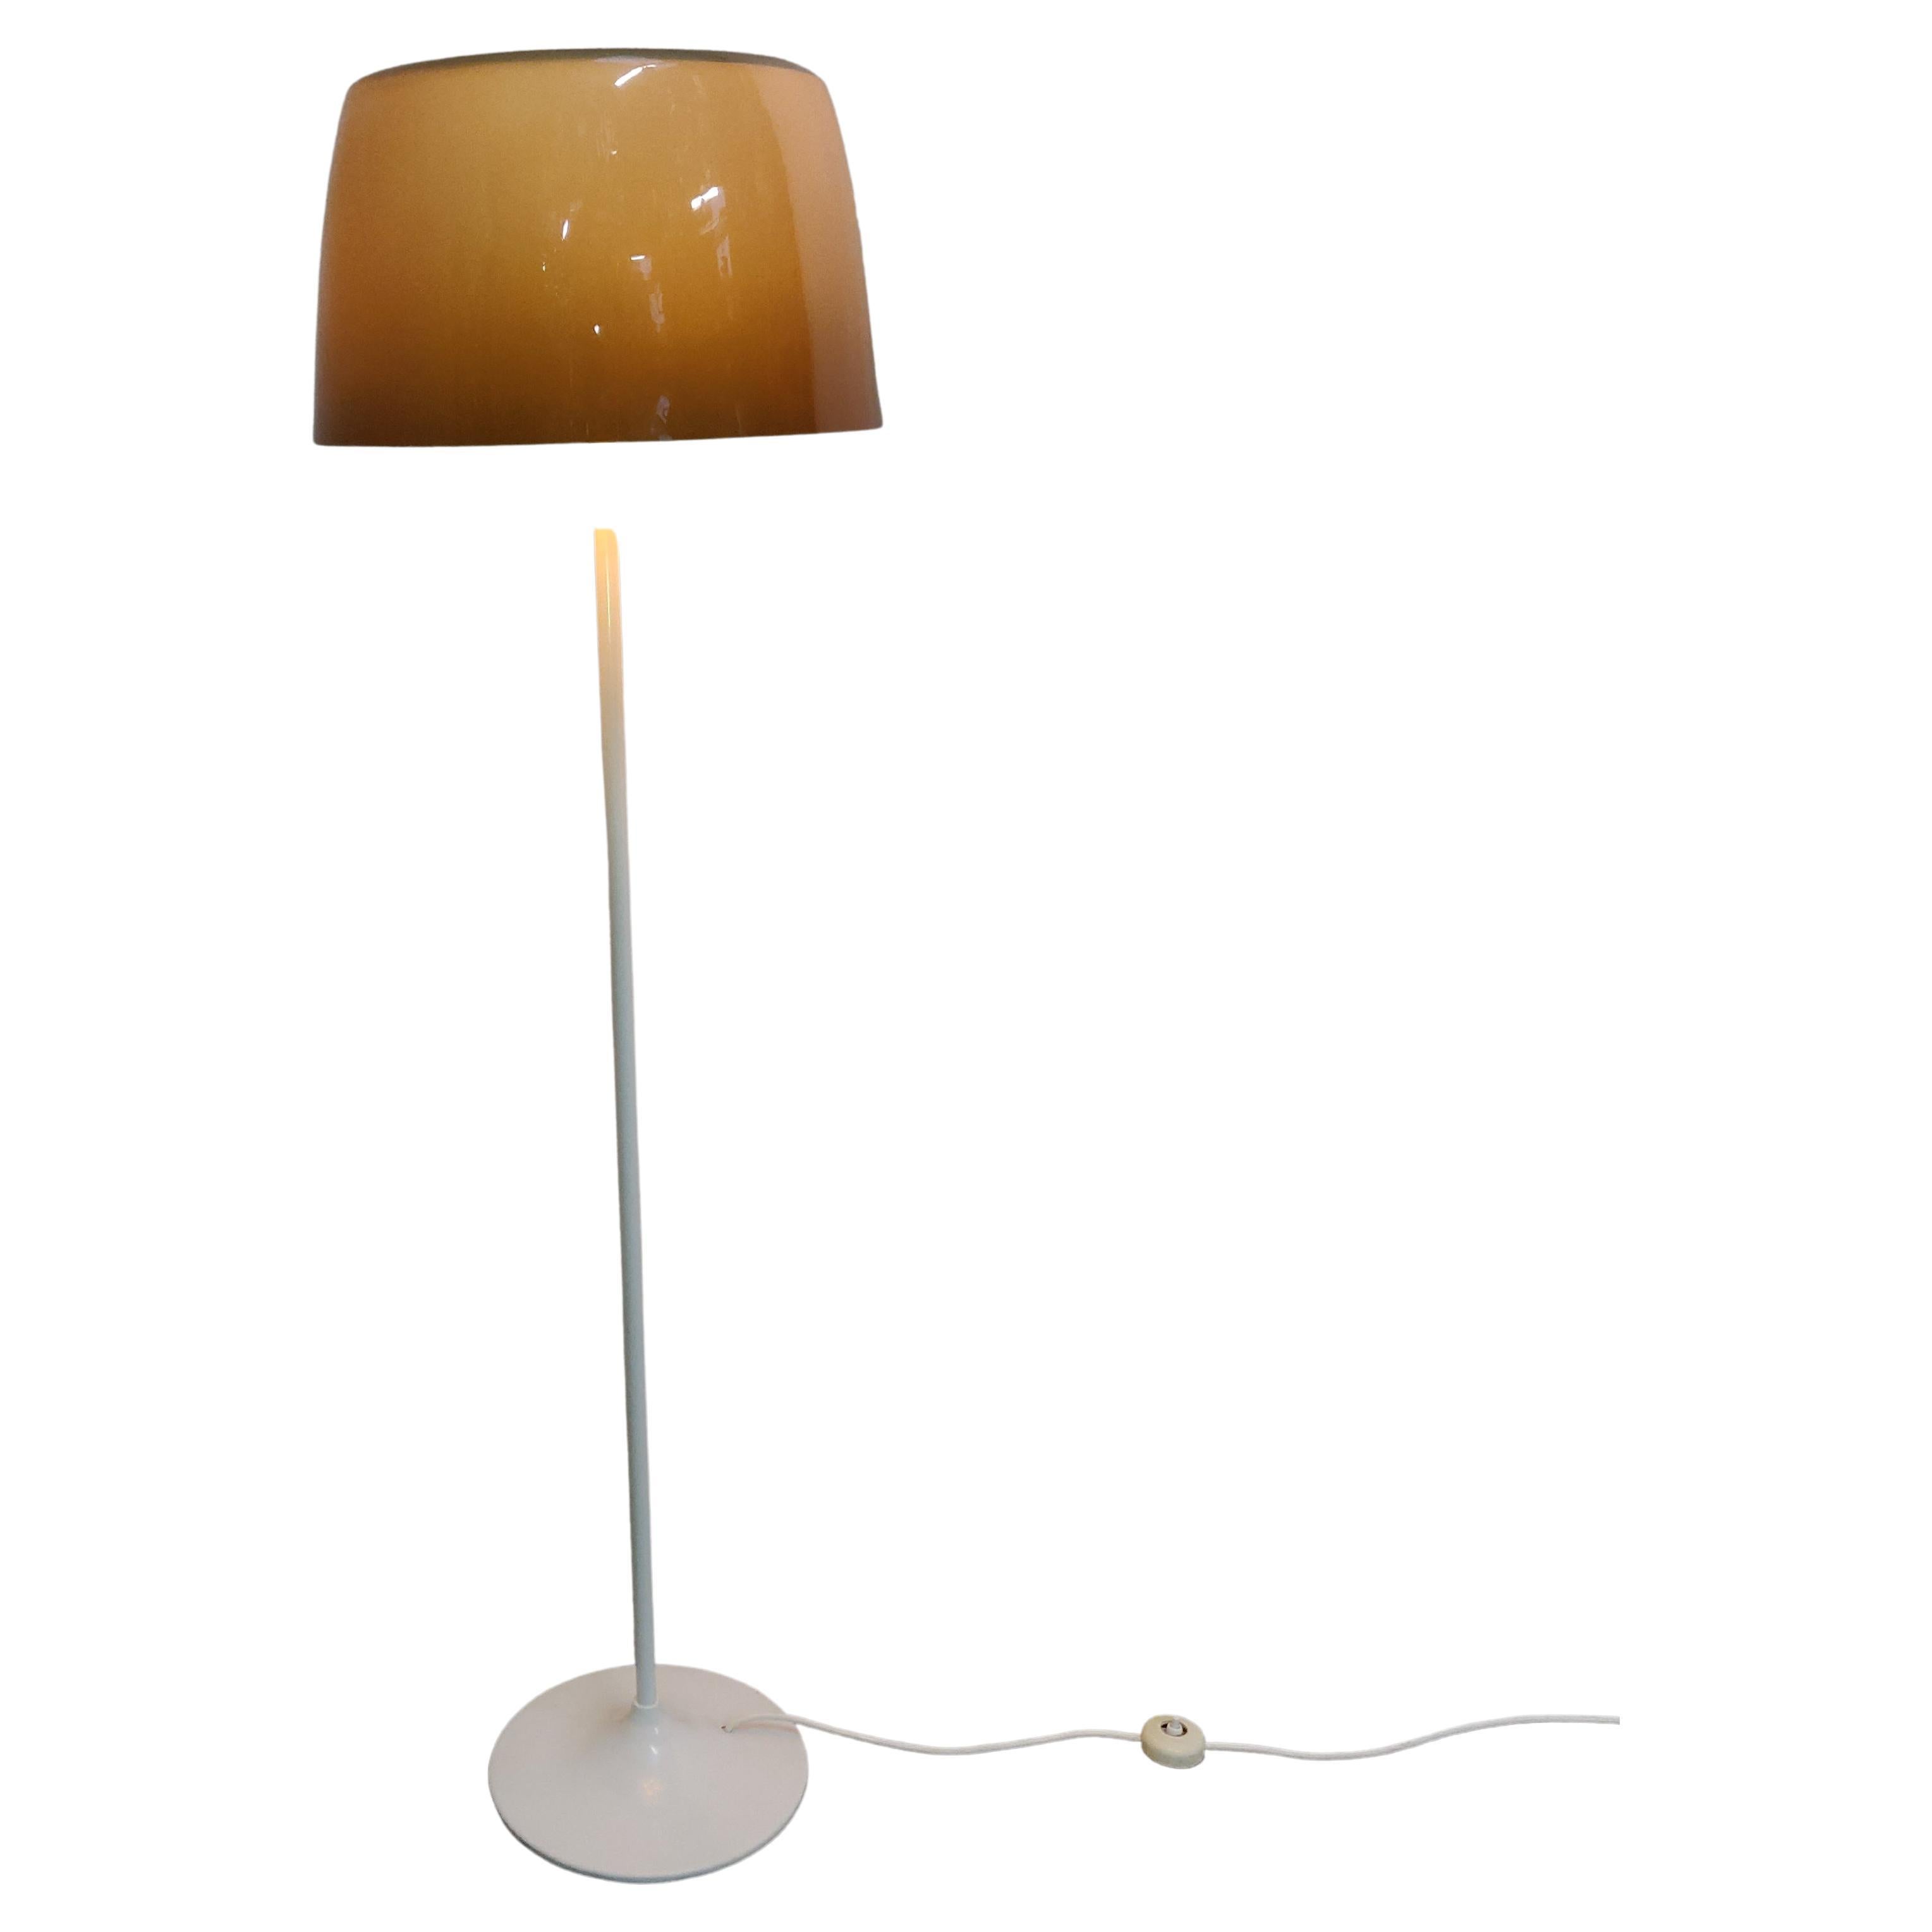 Minimalistic Floor lamp with Lucent brown acrylic lamp shade, 1970s.